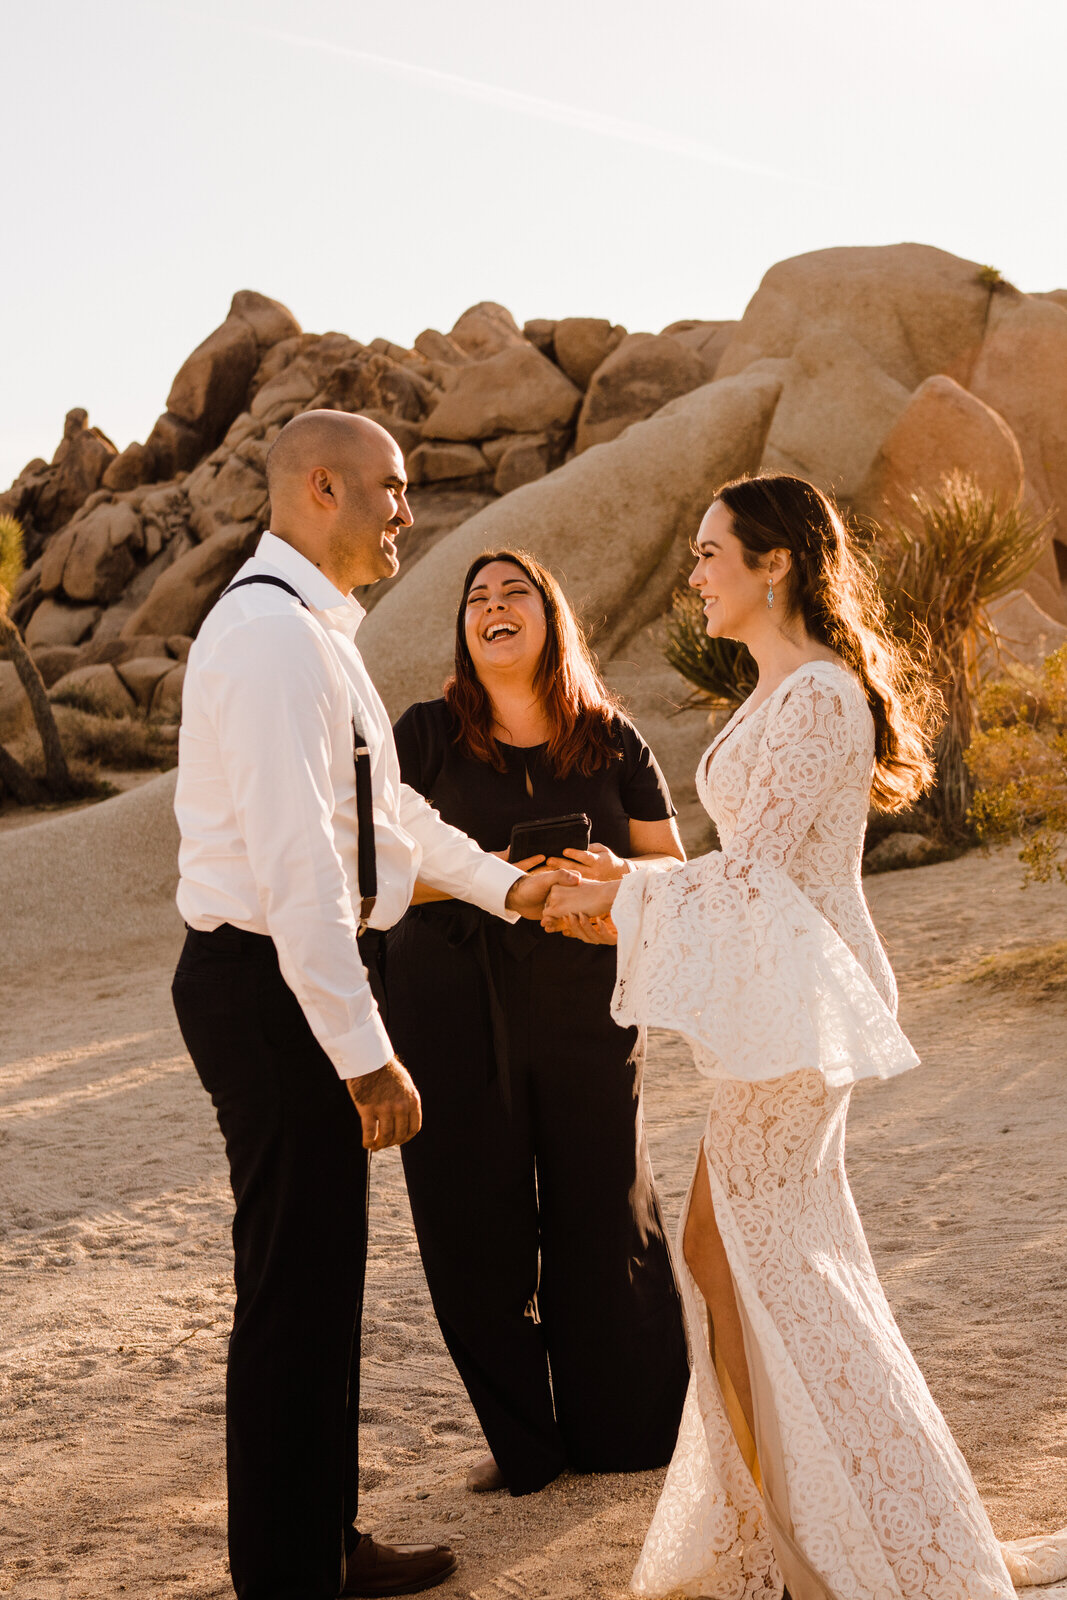 Officiant laughs with bride and groom during elopement ceremony | adventurous, fun, warm wedding photos by Kept Record | www.keptrecord.com